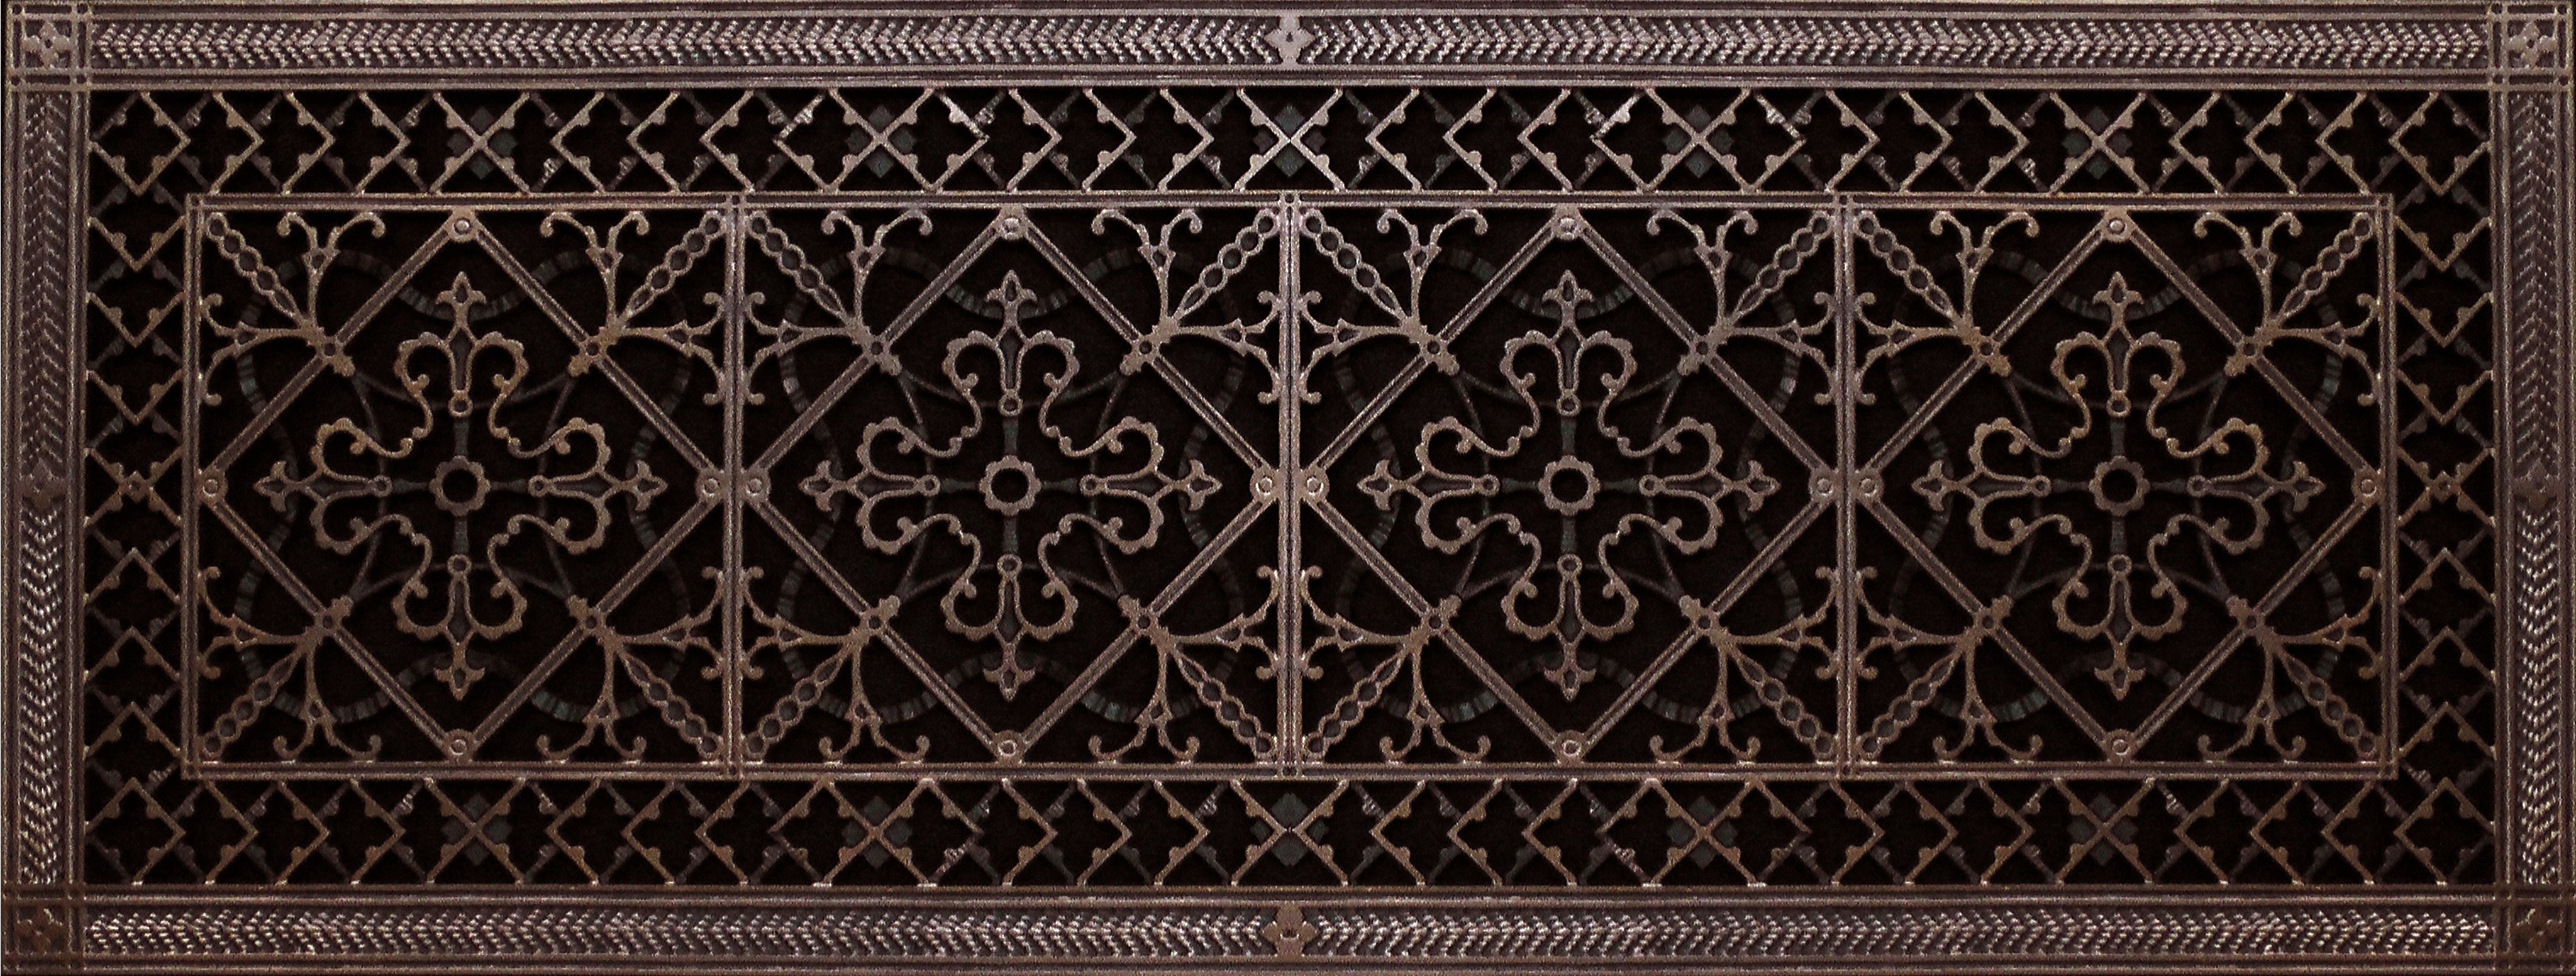 Arts and Crafts decorative grille 12" x 36"